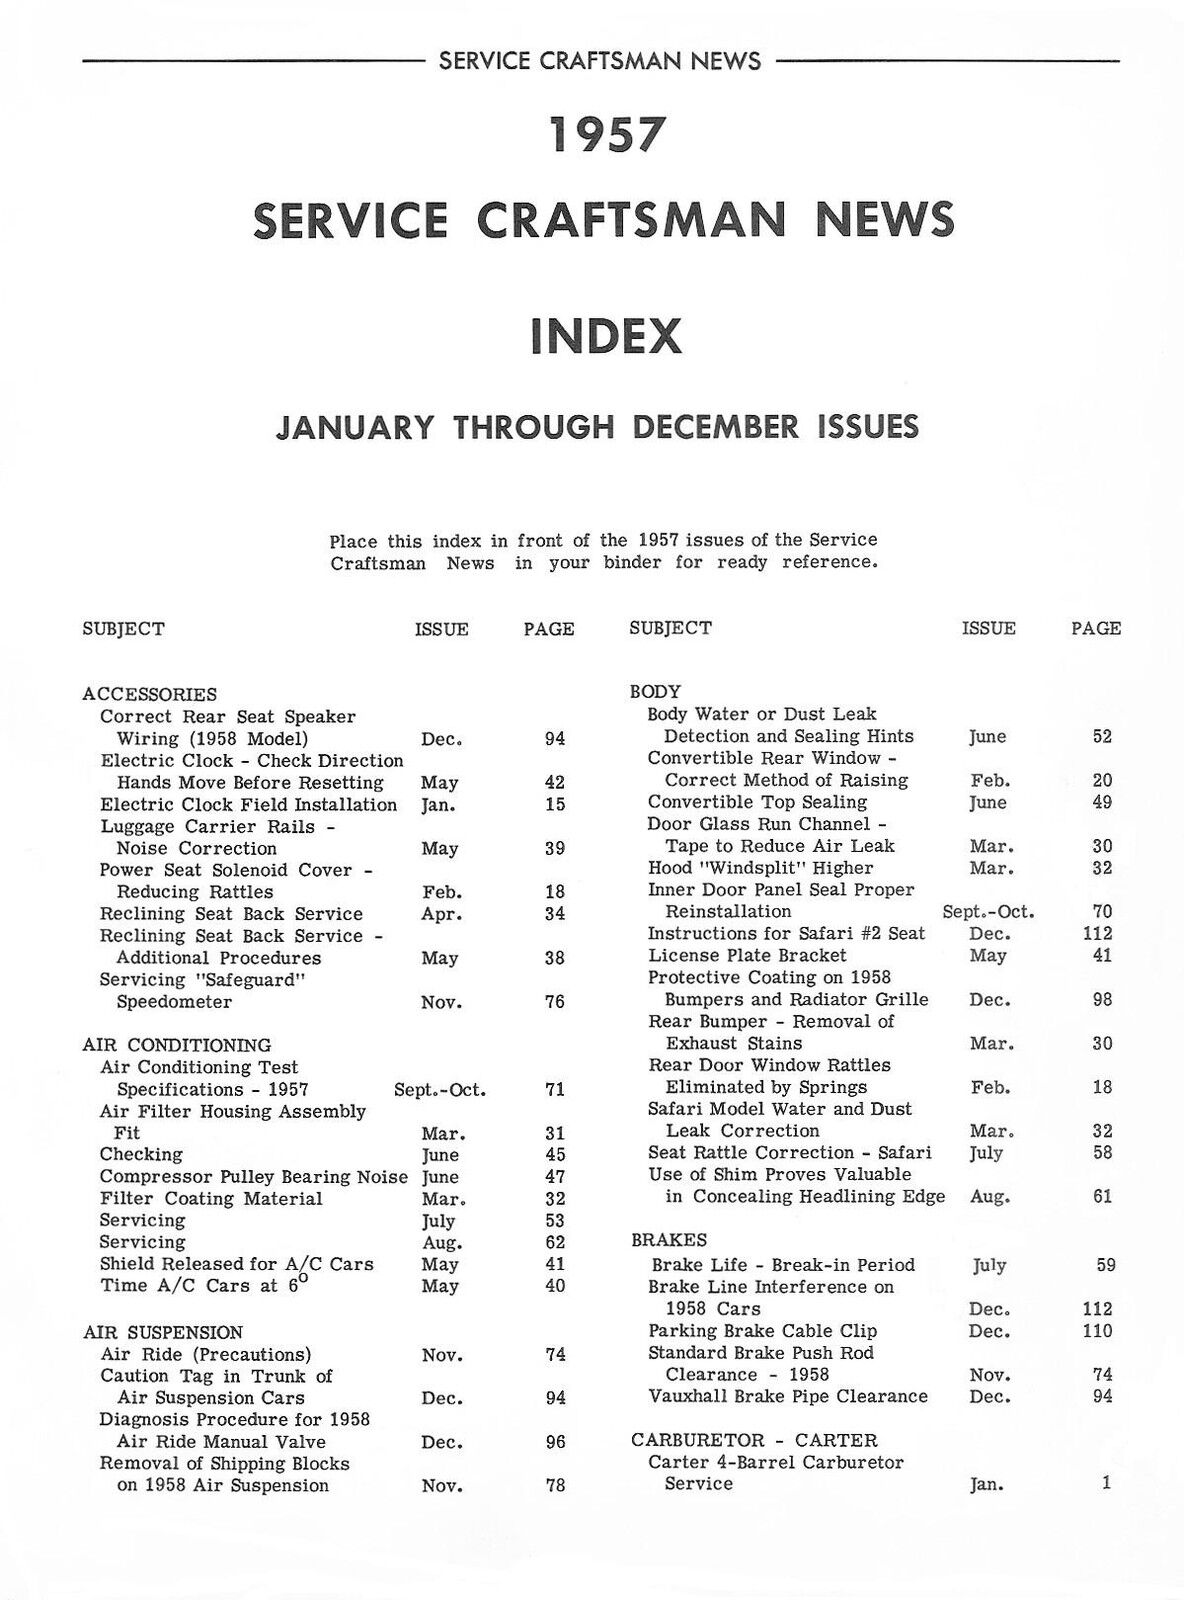 1957 Pontiac Service Craftsman Factory Service Updates in pdf Format On a CD